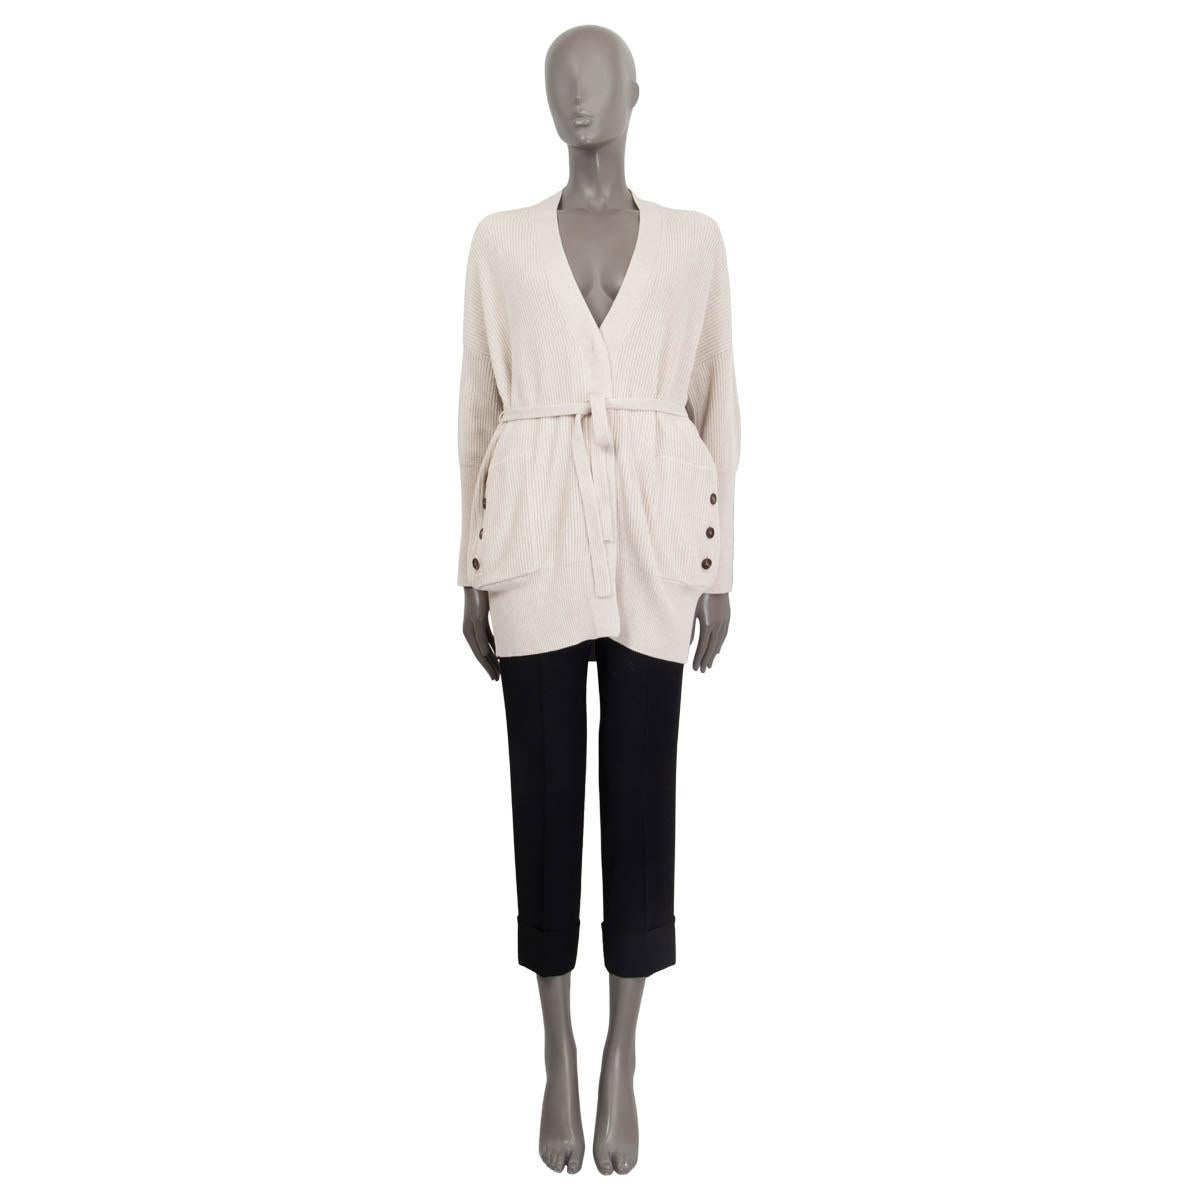 100% authentic Brunello Cucinelli belted knit cardigan in beige cotton (100%). Features buttoned sleves with metal pearl embellishment and buttoned pockets on the front. Opens with one concealed button on the front. Unlined. Has been worn and is in